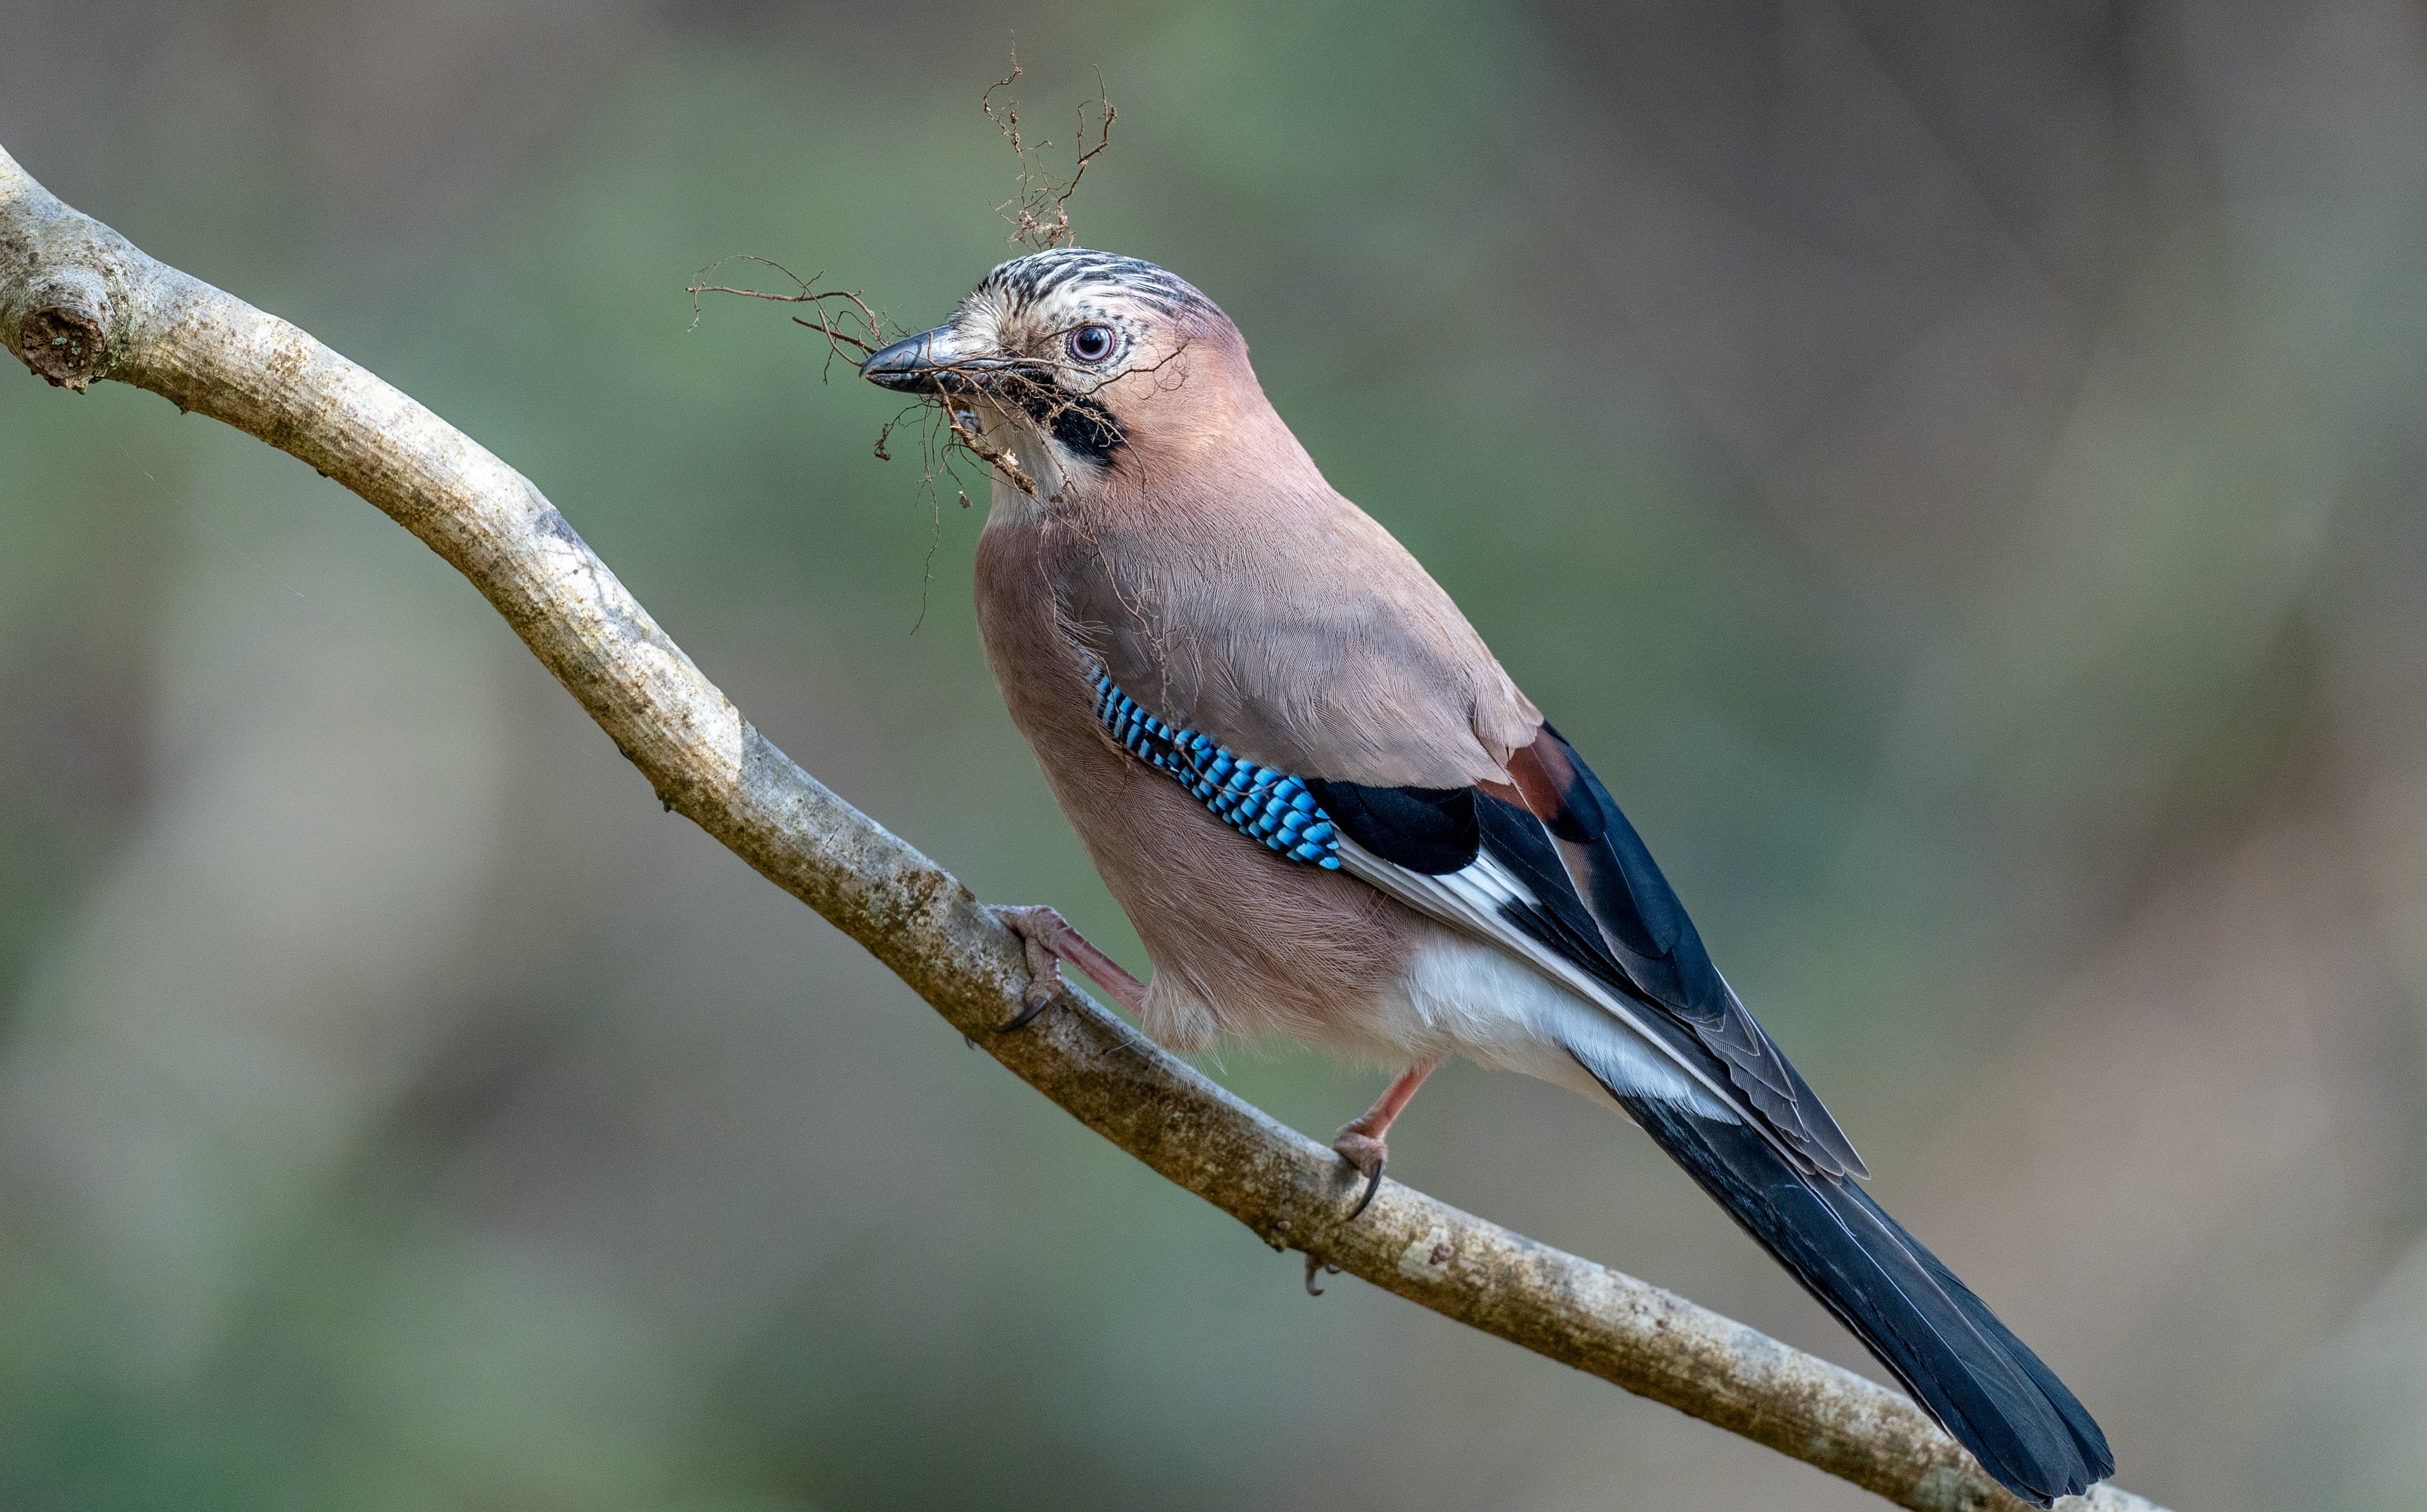 Image of a Jay, a buff coloured bird in the crow family with a bright blue flashon its wing.